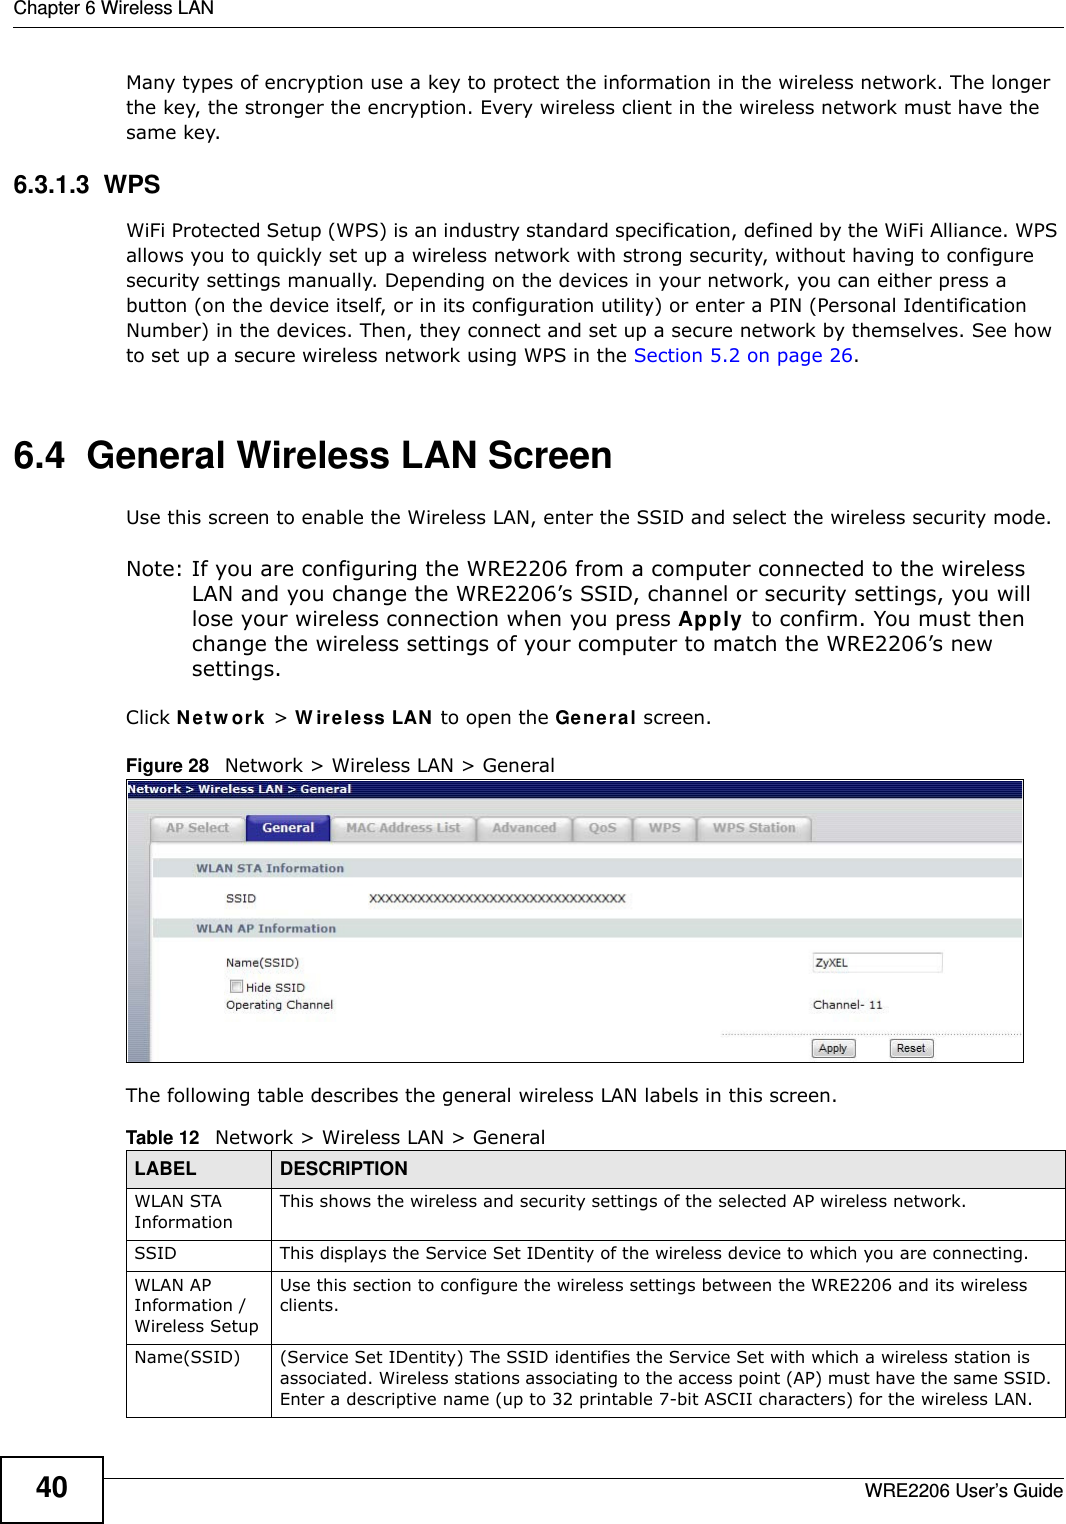 Chapter 6 Wireless LANWRE2206 User’s Guide40Many types of encryption use a key to protect the information in the wireless network. The longer the key, the stronger the encryption. Every wireless client in the wireless network must have the same key.6.3.1.3  WPSWiFi Protected Setup (WPS) is an industry standard specification, defined by the WiFi Alliance. WPS allows you to quickly set up a wireless network with strong security, without having to configure security settings manually. Depending on the devices in your network, you can either press a button (on the device itself, or in its configuration utility) or enter a PIN (Personal Identification Number) in the devices. Then, they connect and set up a secure network by themselves. See how to set up a secure wireless network using WPS in the Section 5.2 on page 26. 6.4  General Wireless LAN Screen Use this screen to enable the Wireless LAN, enter the SSID and select the wireless security mode.Note: If you are configuring the WRE2206 from a computer connected to the wireless LAN and you change the WRE2206’s SSID, channel or security settings, you will lose your wireless connection when you press Apply to confirm. You must then change the wireless settings of your computer to match the WRE2206’s new settings.Click N e t w or k &gt; W ir e le ss LAN to open the Gene ral screen.Figure 28   Network &gt; Wireless LAN &gt; General The following table describes the general wireless LAN labels in this screen.Table 12   Network &gt; Wireless LAN &gt; GeneralLABEL DESCRIPTIONWLAN STA InformationThis shows the wireless and security settings of the selected AP wireless network.SSID This displays the Service Set IDentity of the wireless device to which you are connecting.WLAN AP Information / Wireless SetupUse this section to configure the wireless settings between the WRE2206 and its wireless clients.Name(SSID) (Service Set IDentity) The SSID identifies the Service Set with which a wireless station is associated. Wireless stations associating to the access point (AP) must have the same SSID. Enter a descriptive name (up to 32 printable 7-bit ASCII characters) for the wireless LAN. 